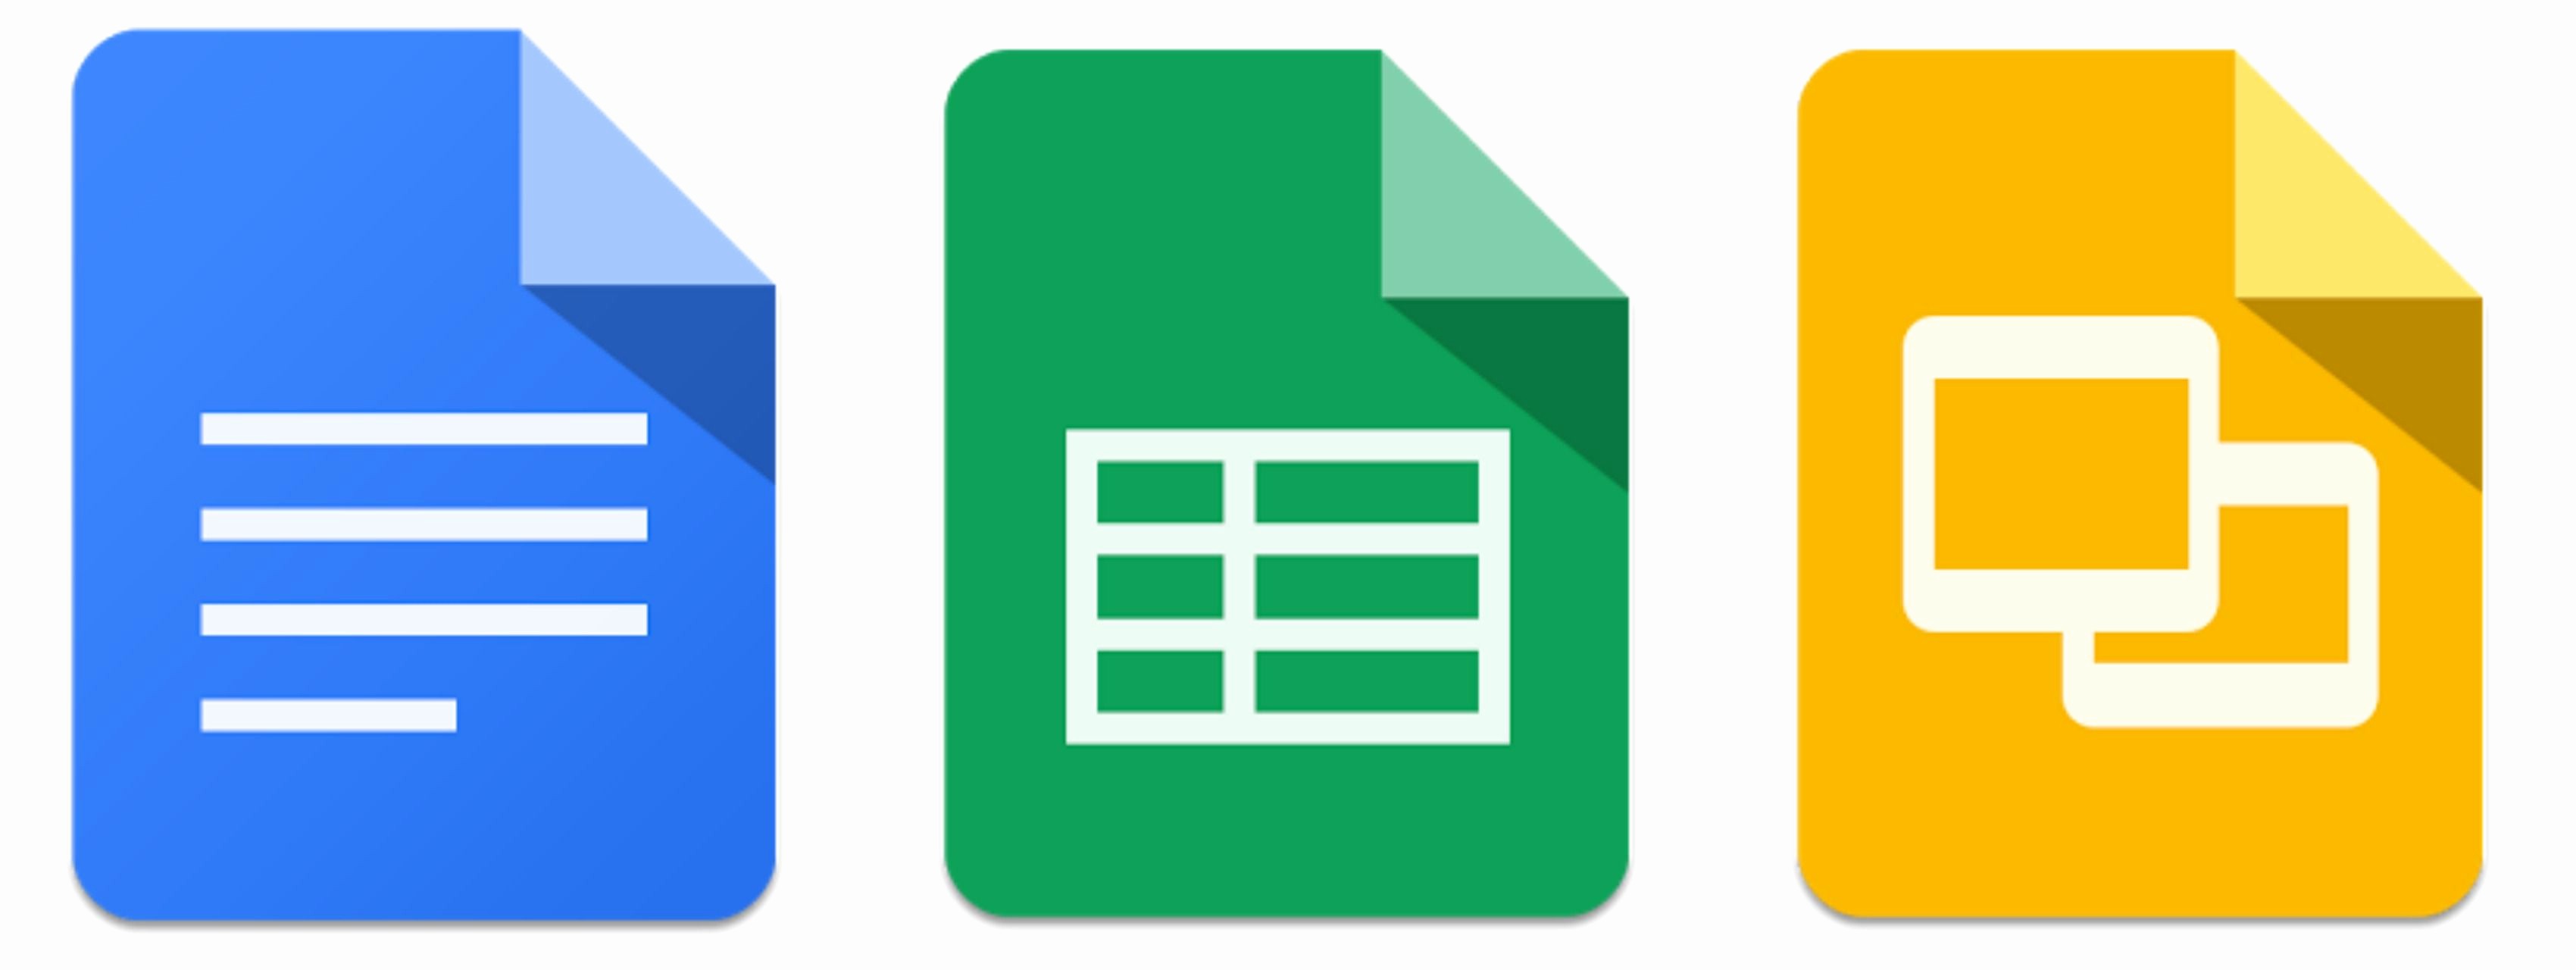 Google Docs Icon Png Awesome Box Personal Review Rating